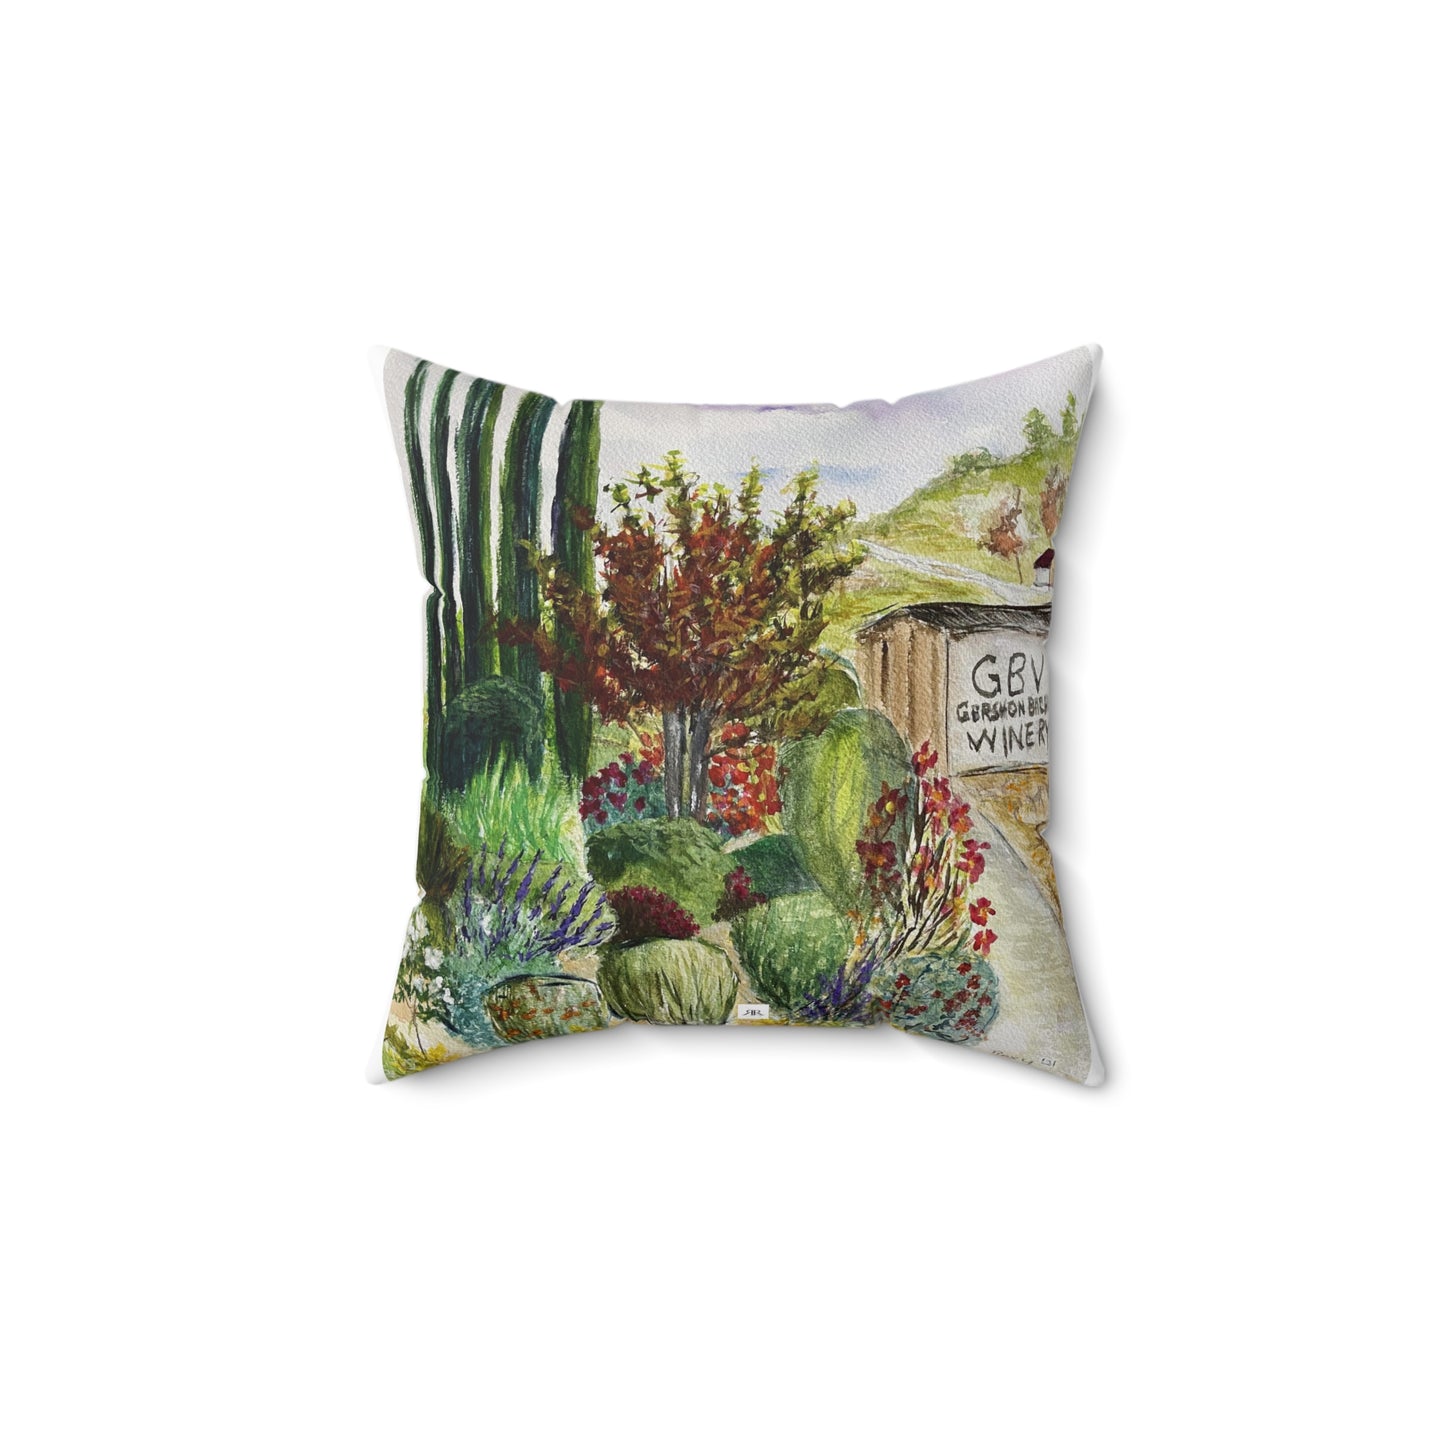 Hill to the Barrel Room at GBV Indoor Spun Polyester Square Pillow